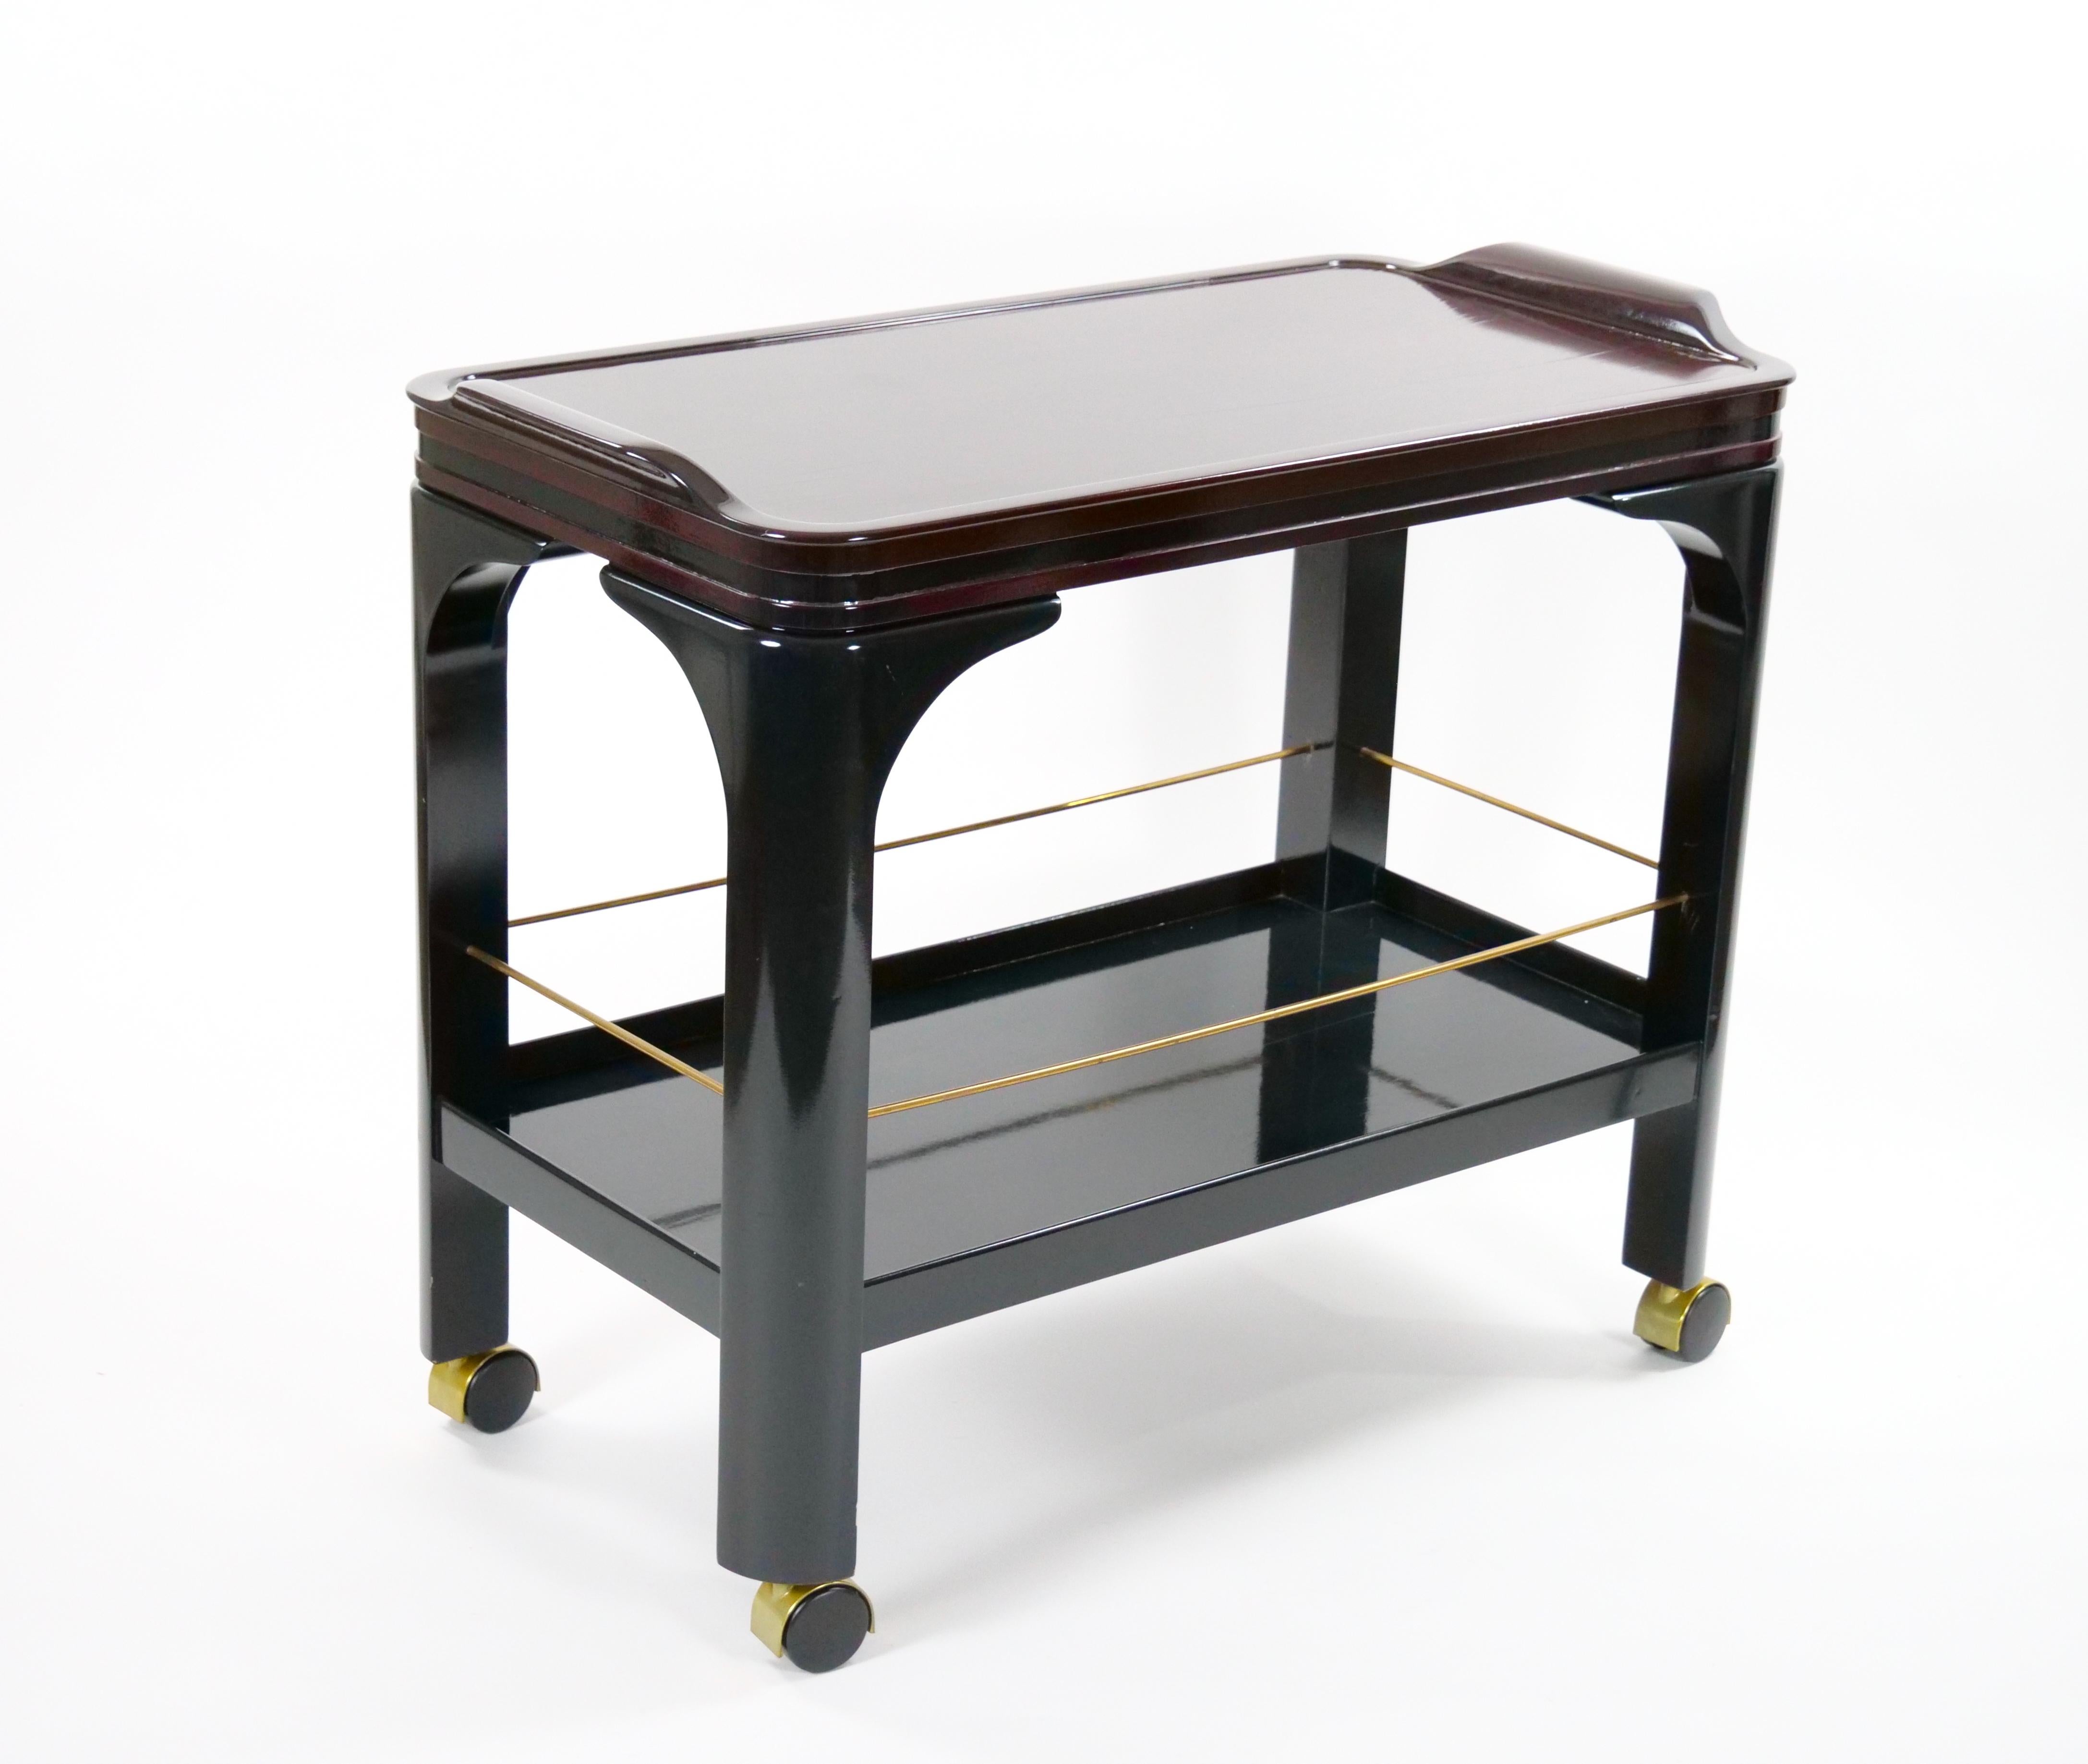 Elevate your entertaining with this stylish Mid-Century Modern Brown and Black Lacquered Two-Tiered Rolling Serving Bar Cart, showcasing exquisite brass accents and castor details on the lower shelf. Designed by the talented Paul M. Jones, this cart